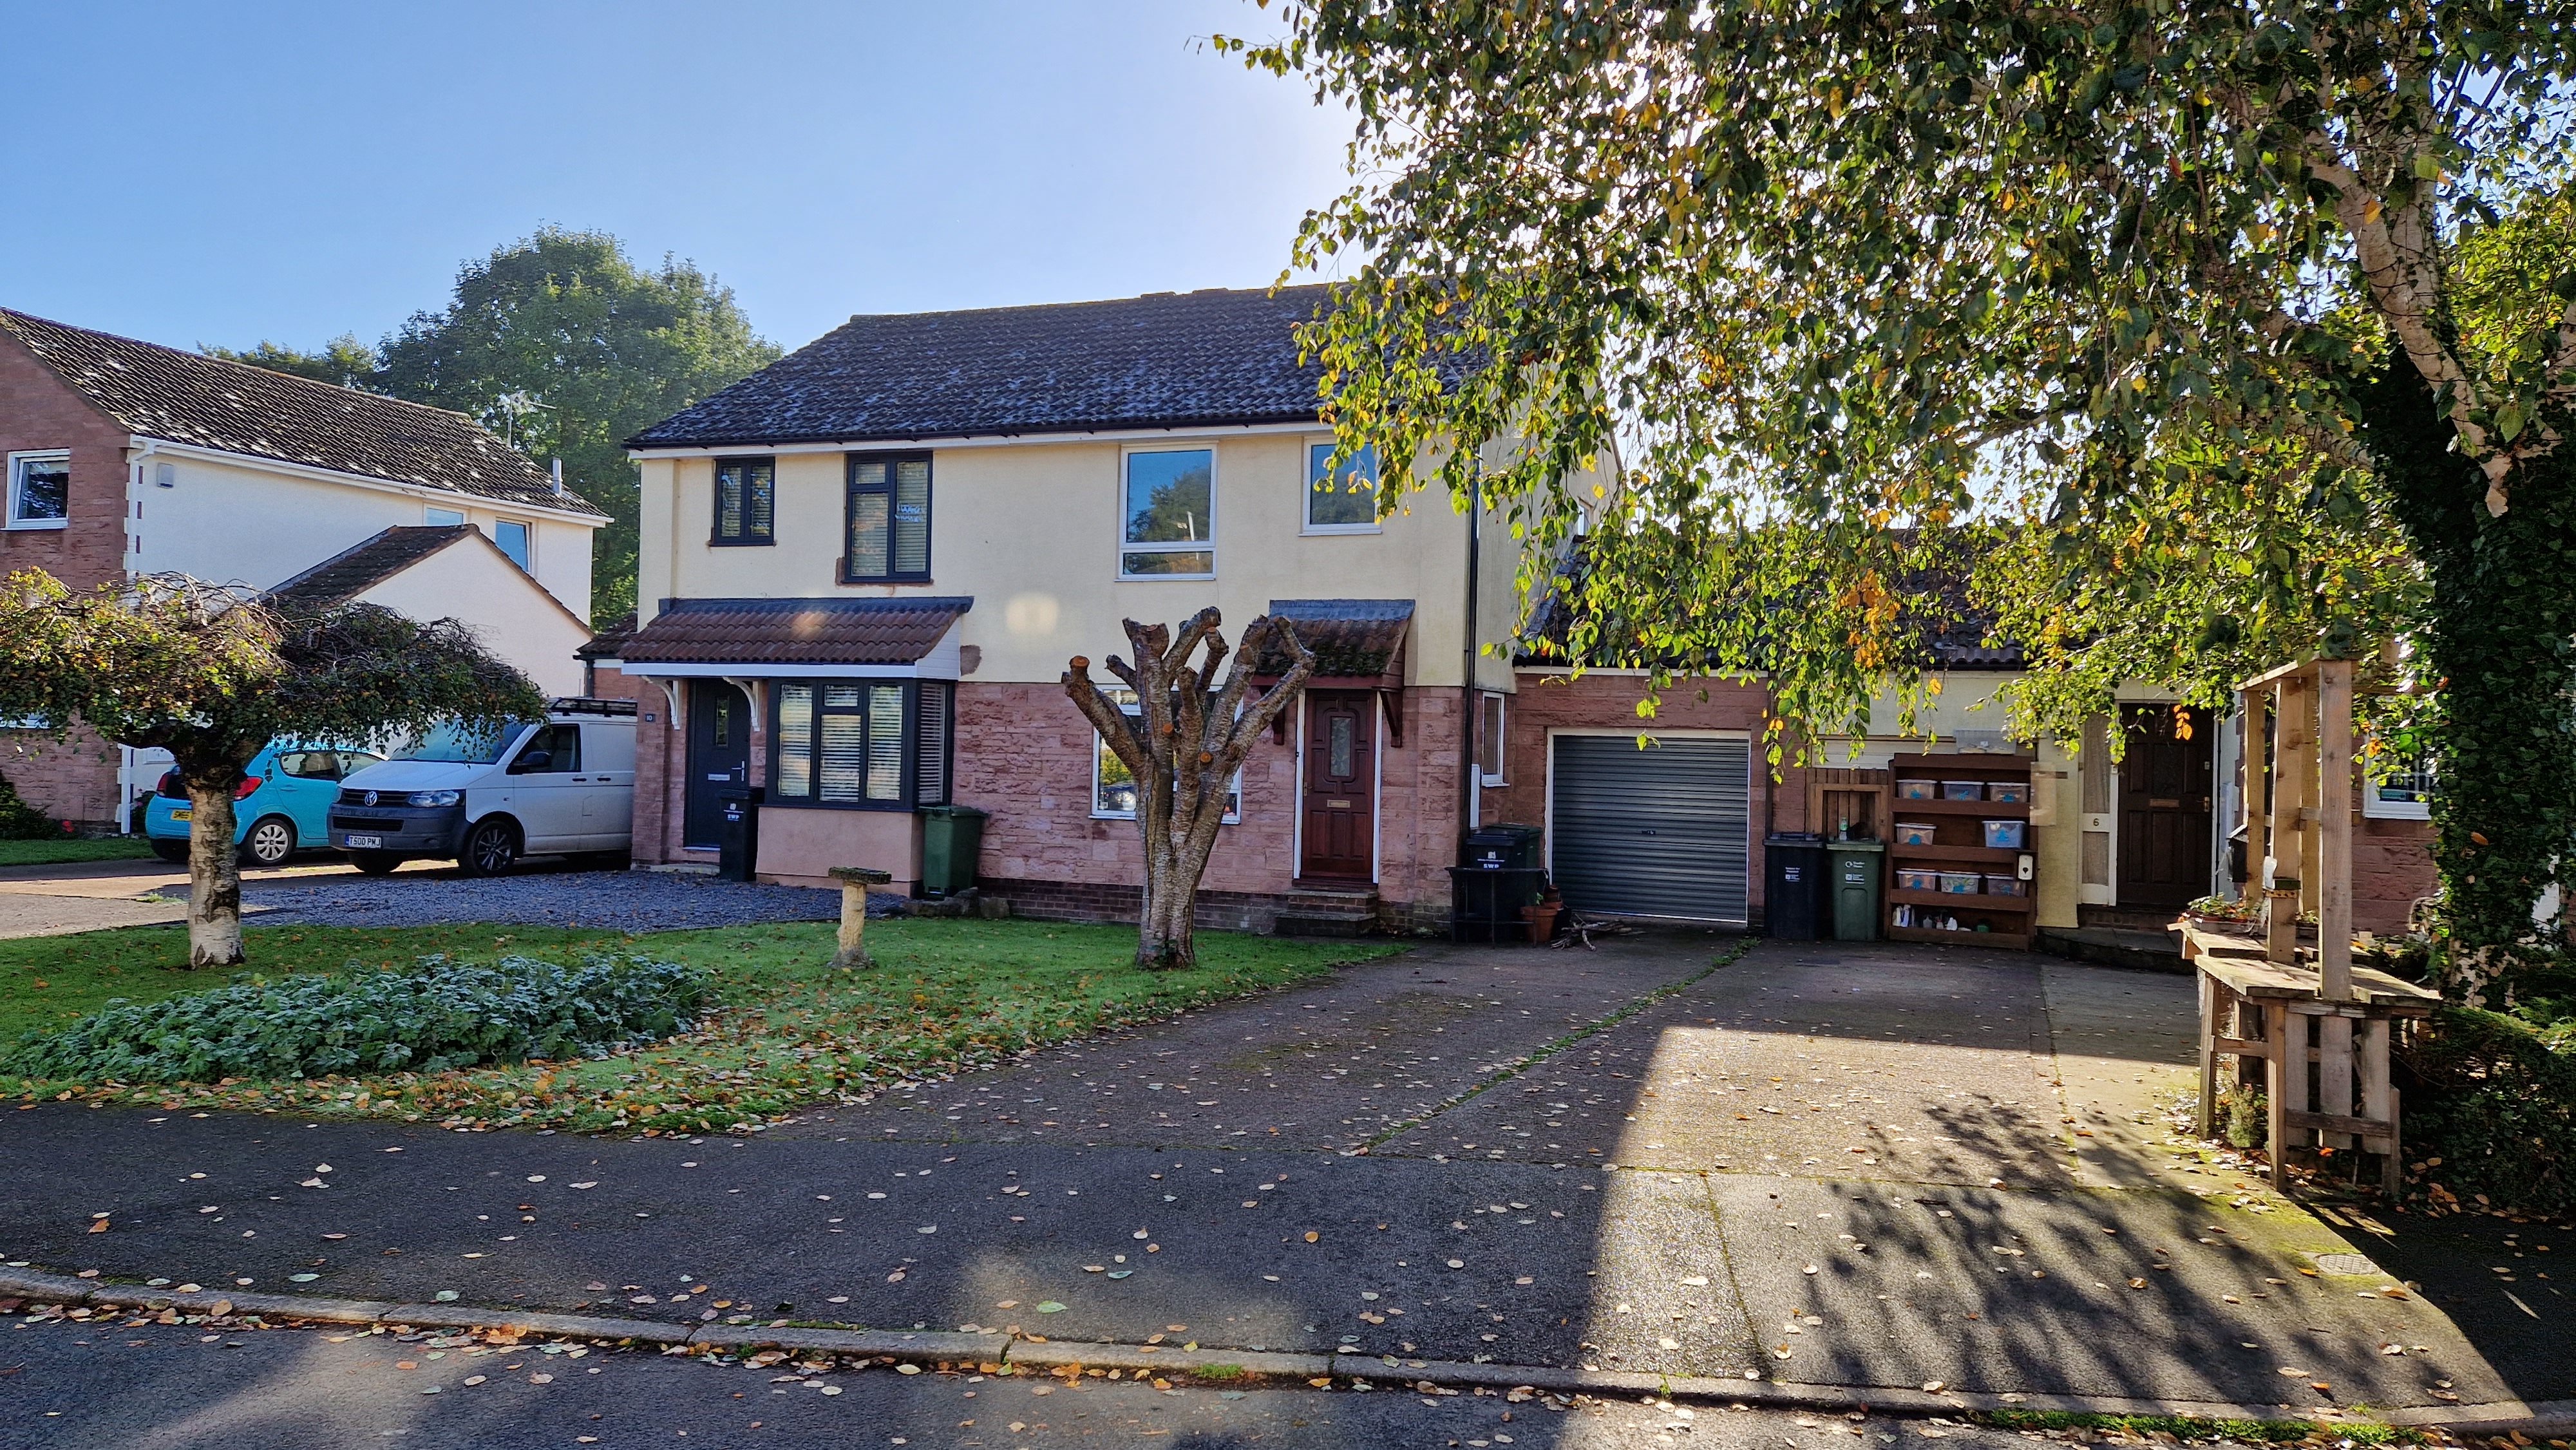 3 bed semi-detached house to rent in Ryepool, Bishops Lydeard - Property Image 1